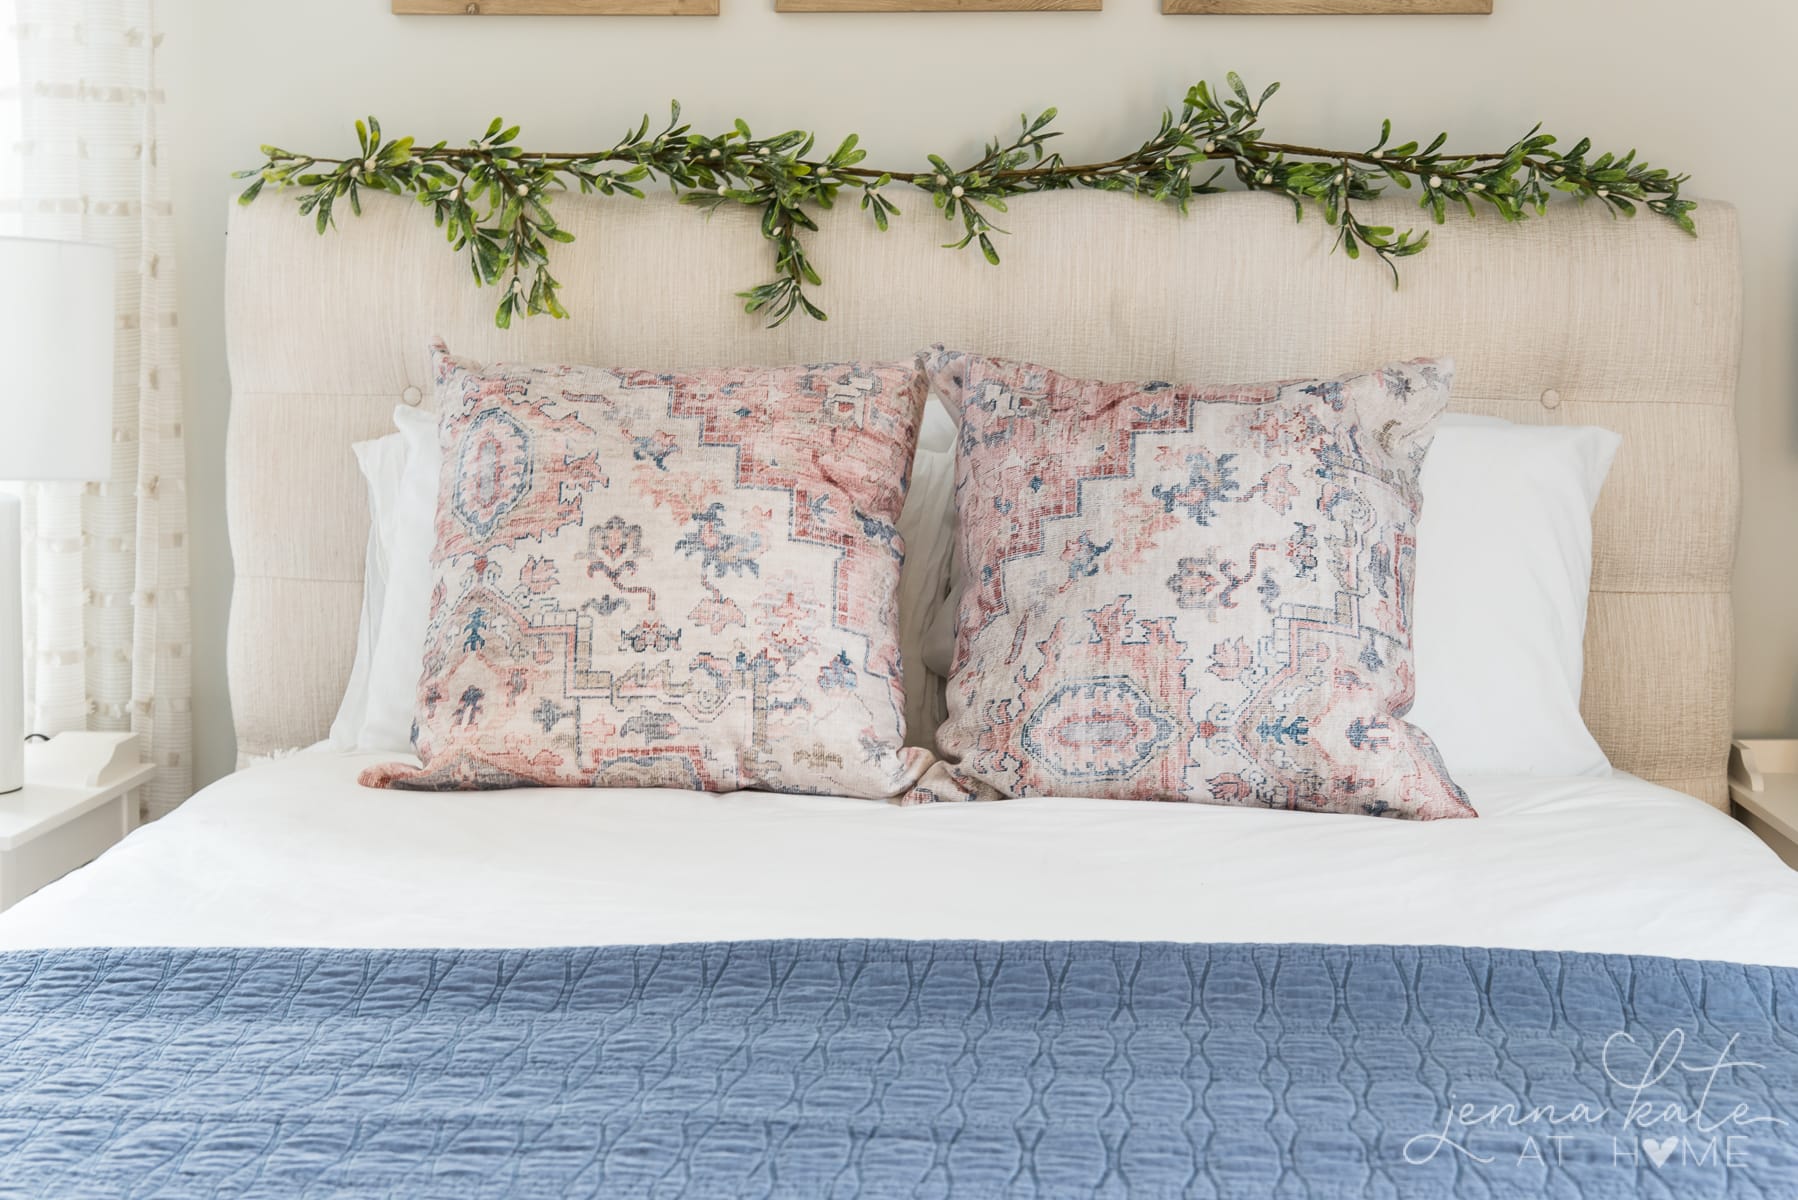 Pink and blue throw pillows on the bed with mistletoe garland on the headboard